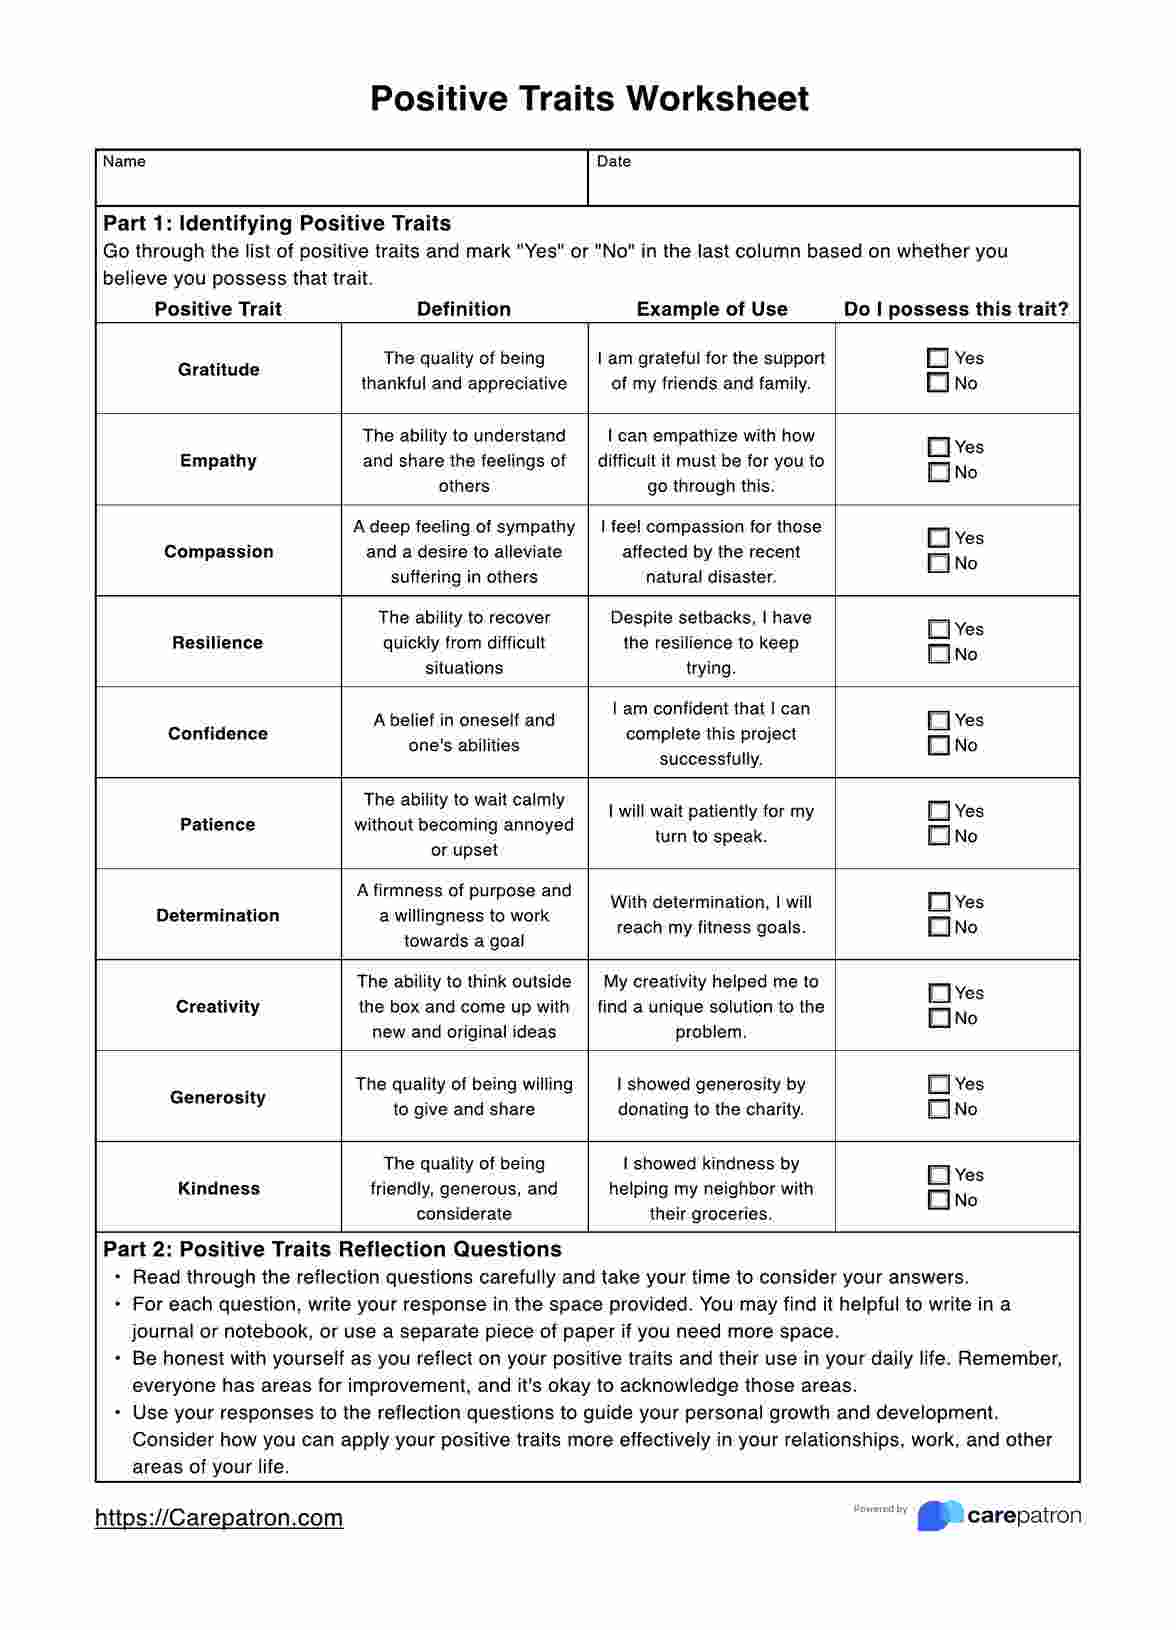 Positive Traits Worksheets PDF Example